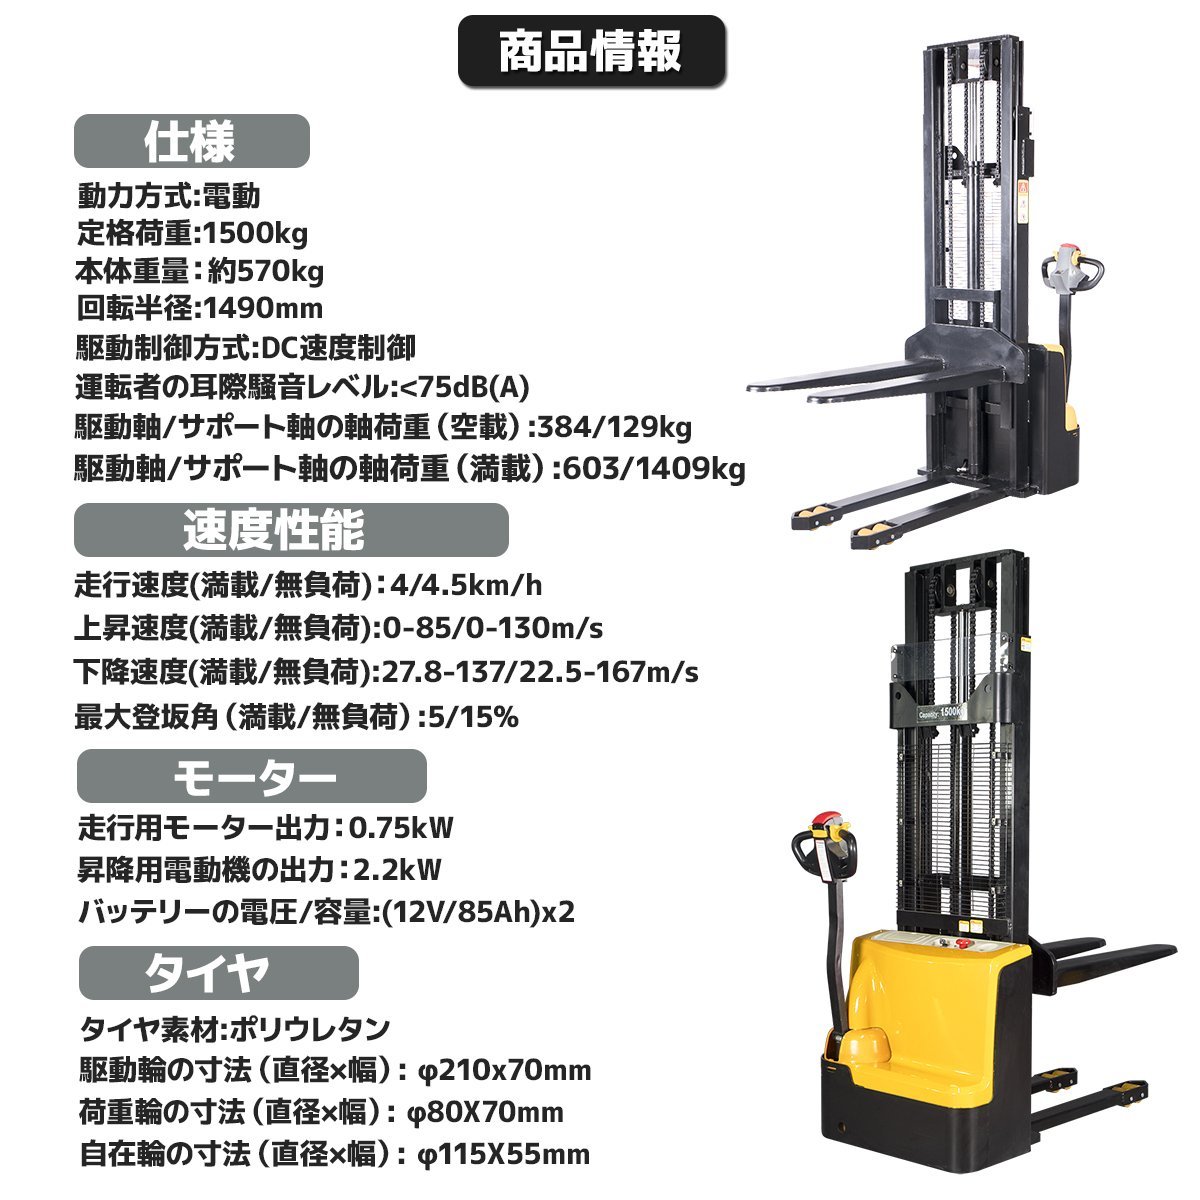 *2 car limitation * animation attaching electric forklift s Tucker self-propelled electric elevator maximum loading 1500kg highest rank 3m Fork overall width remote control key attaching * one year guaranteed 